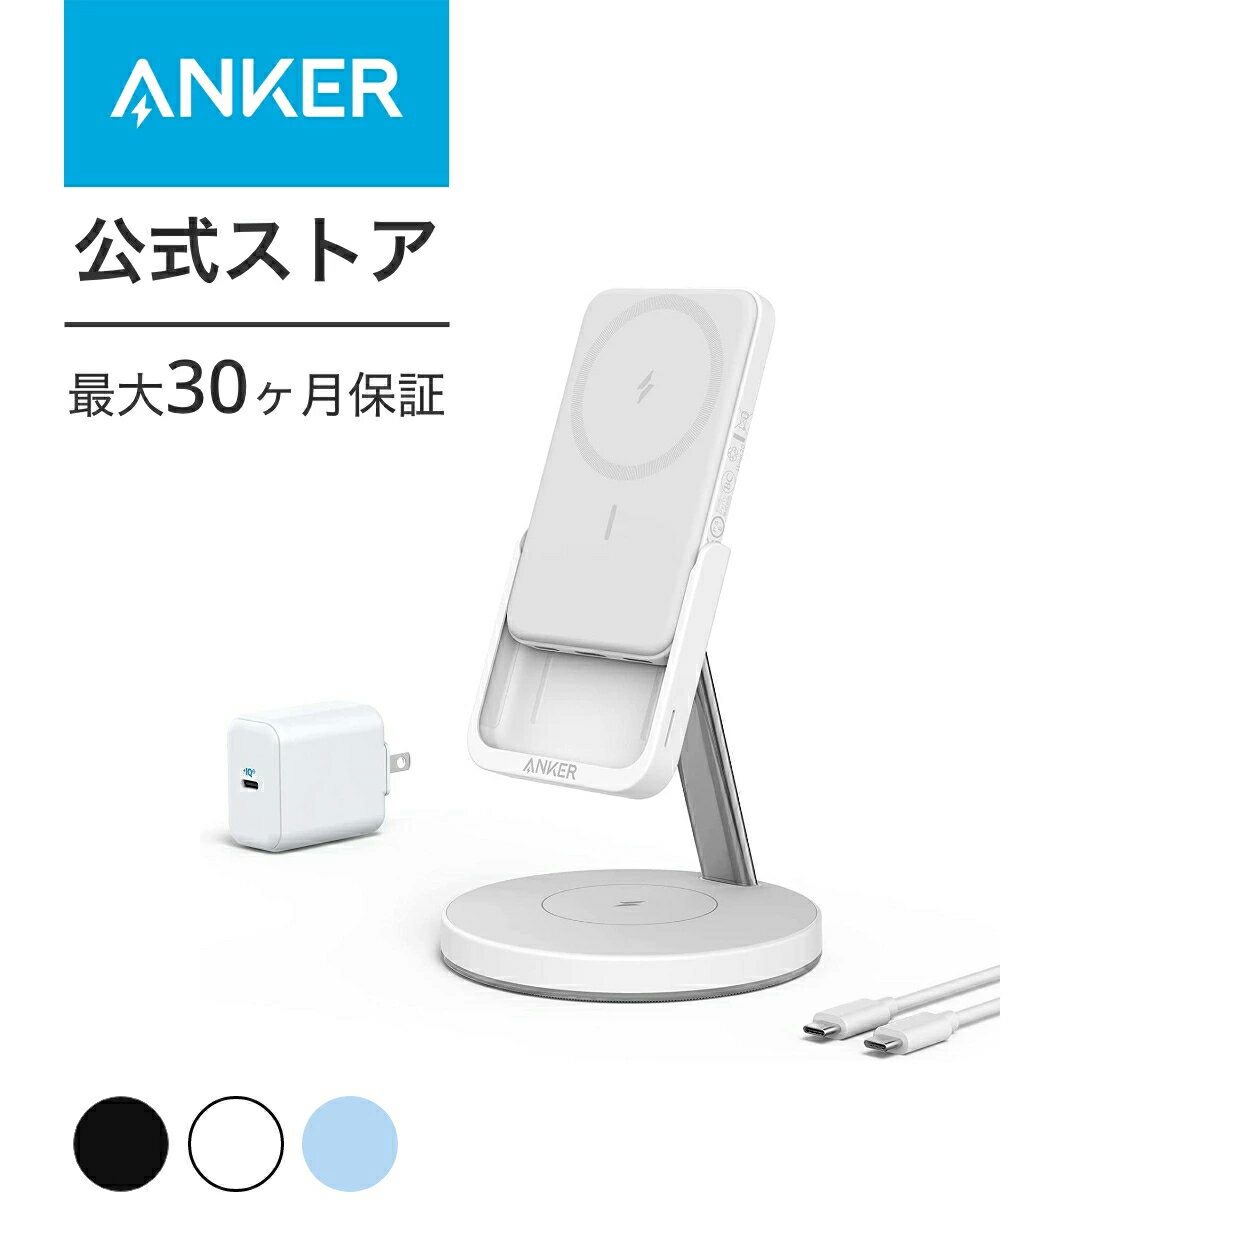 Anker 633 Magnetic Wireless Ch